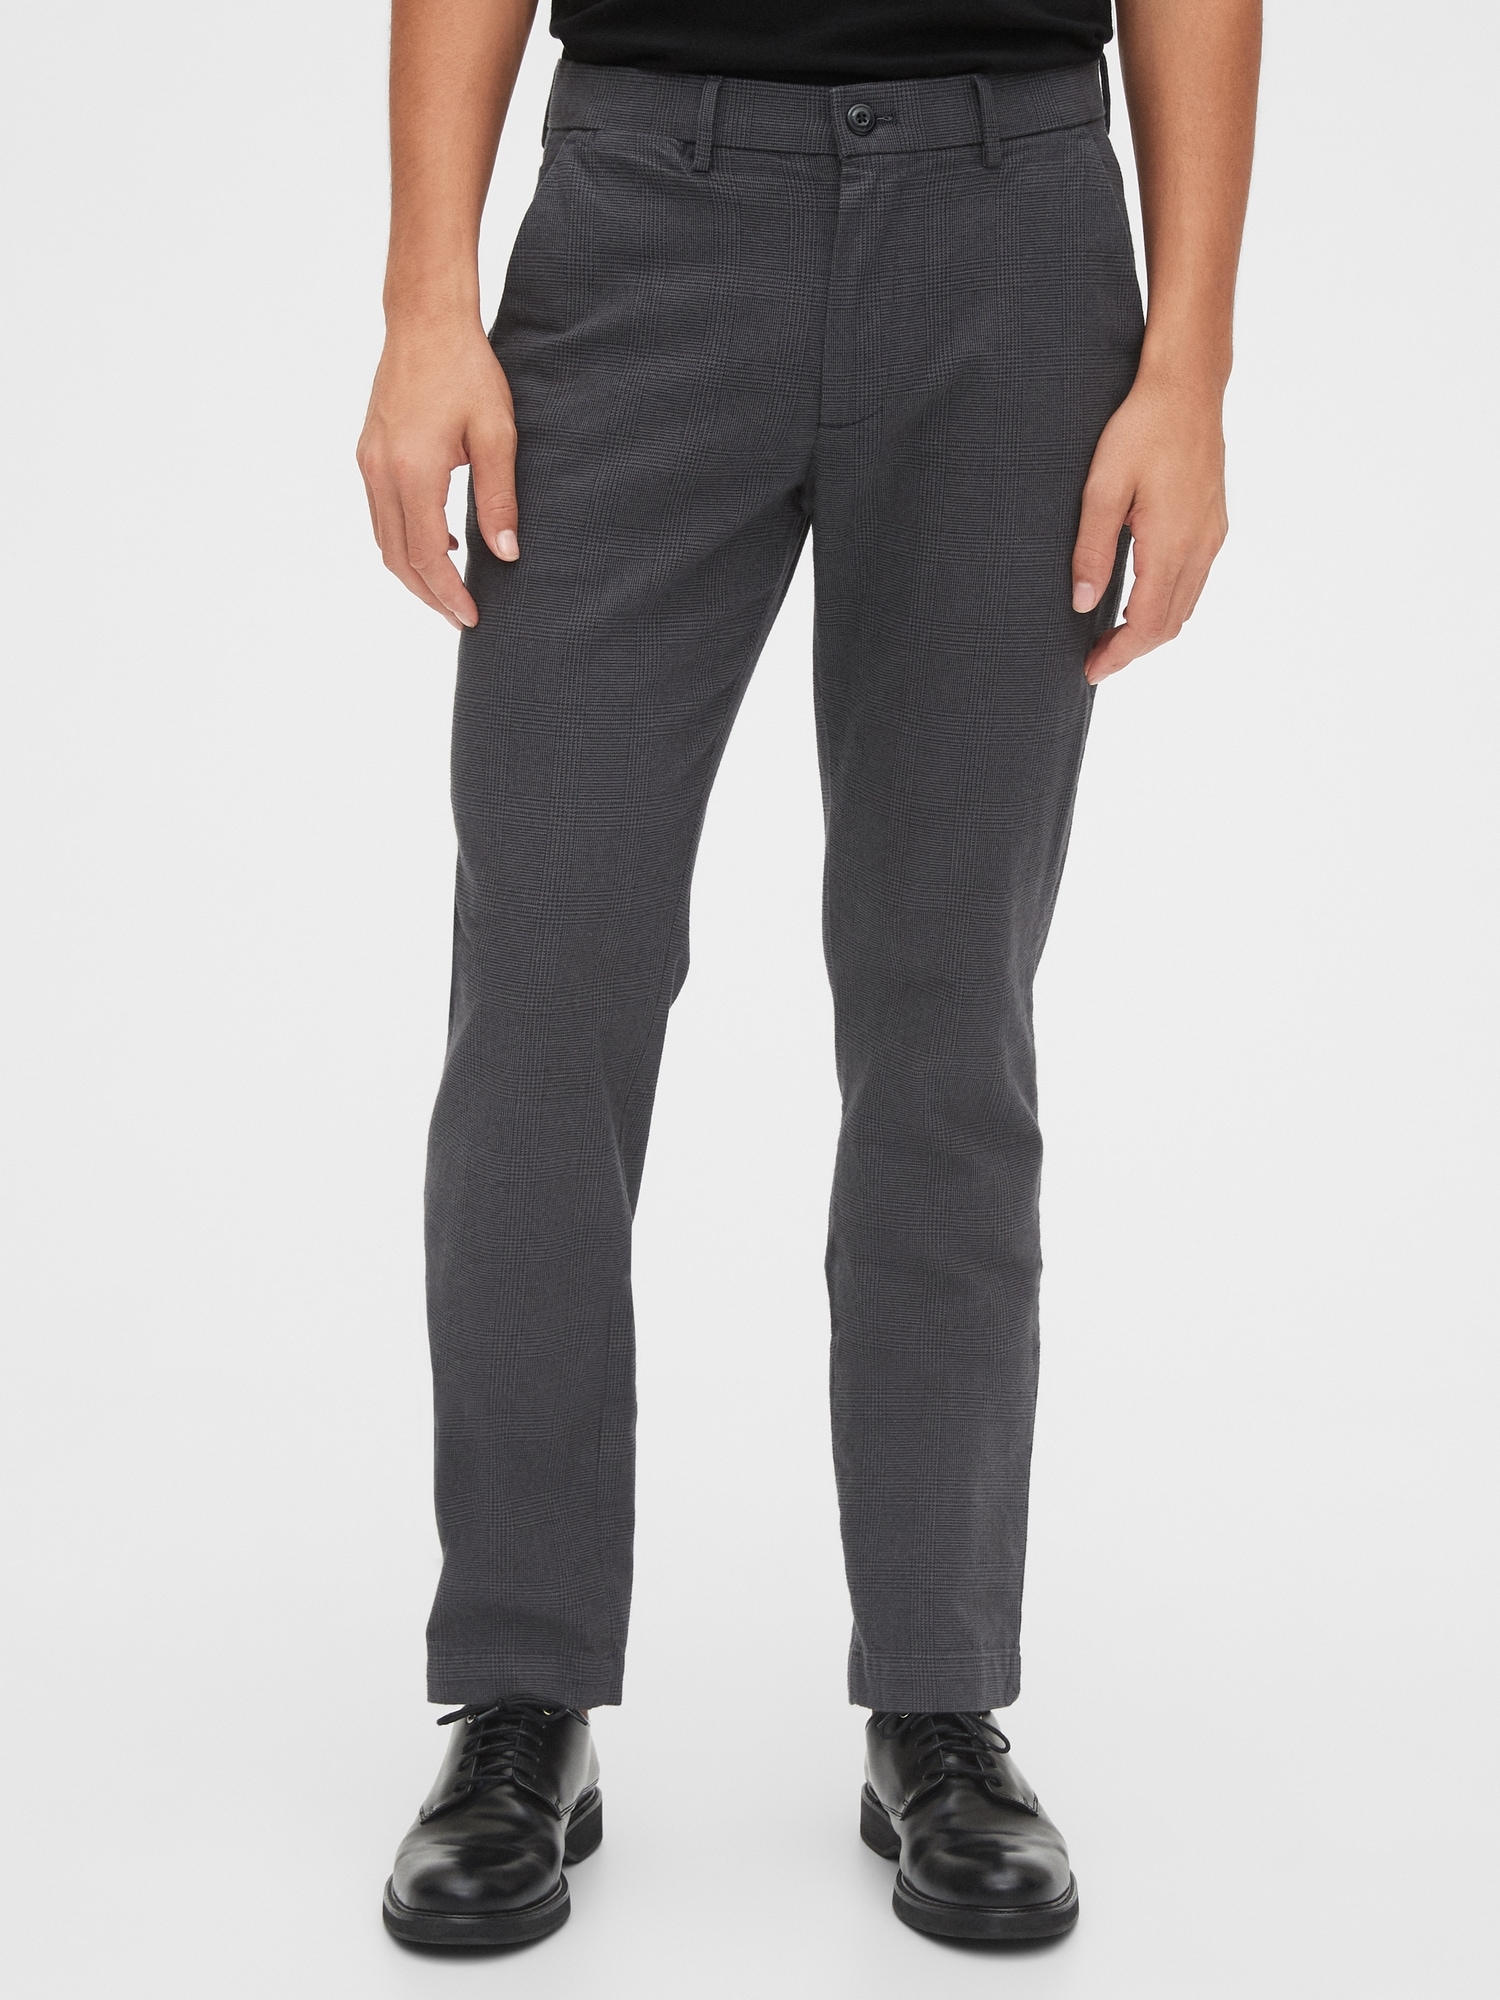 Brushed Twill Pants in Slim Fit with GapFlex